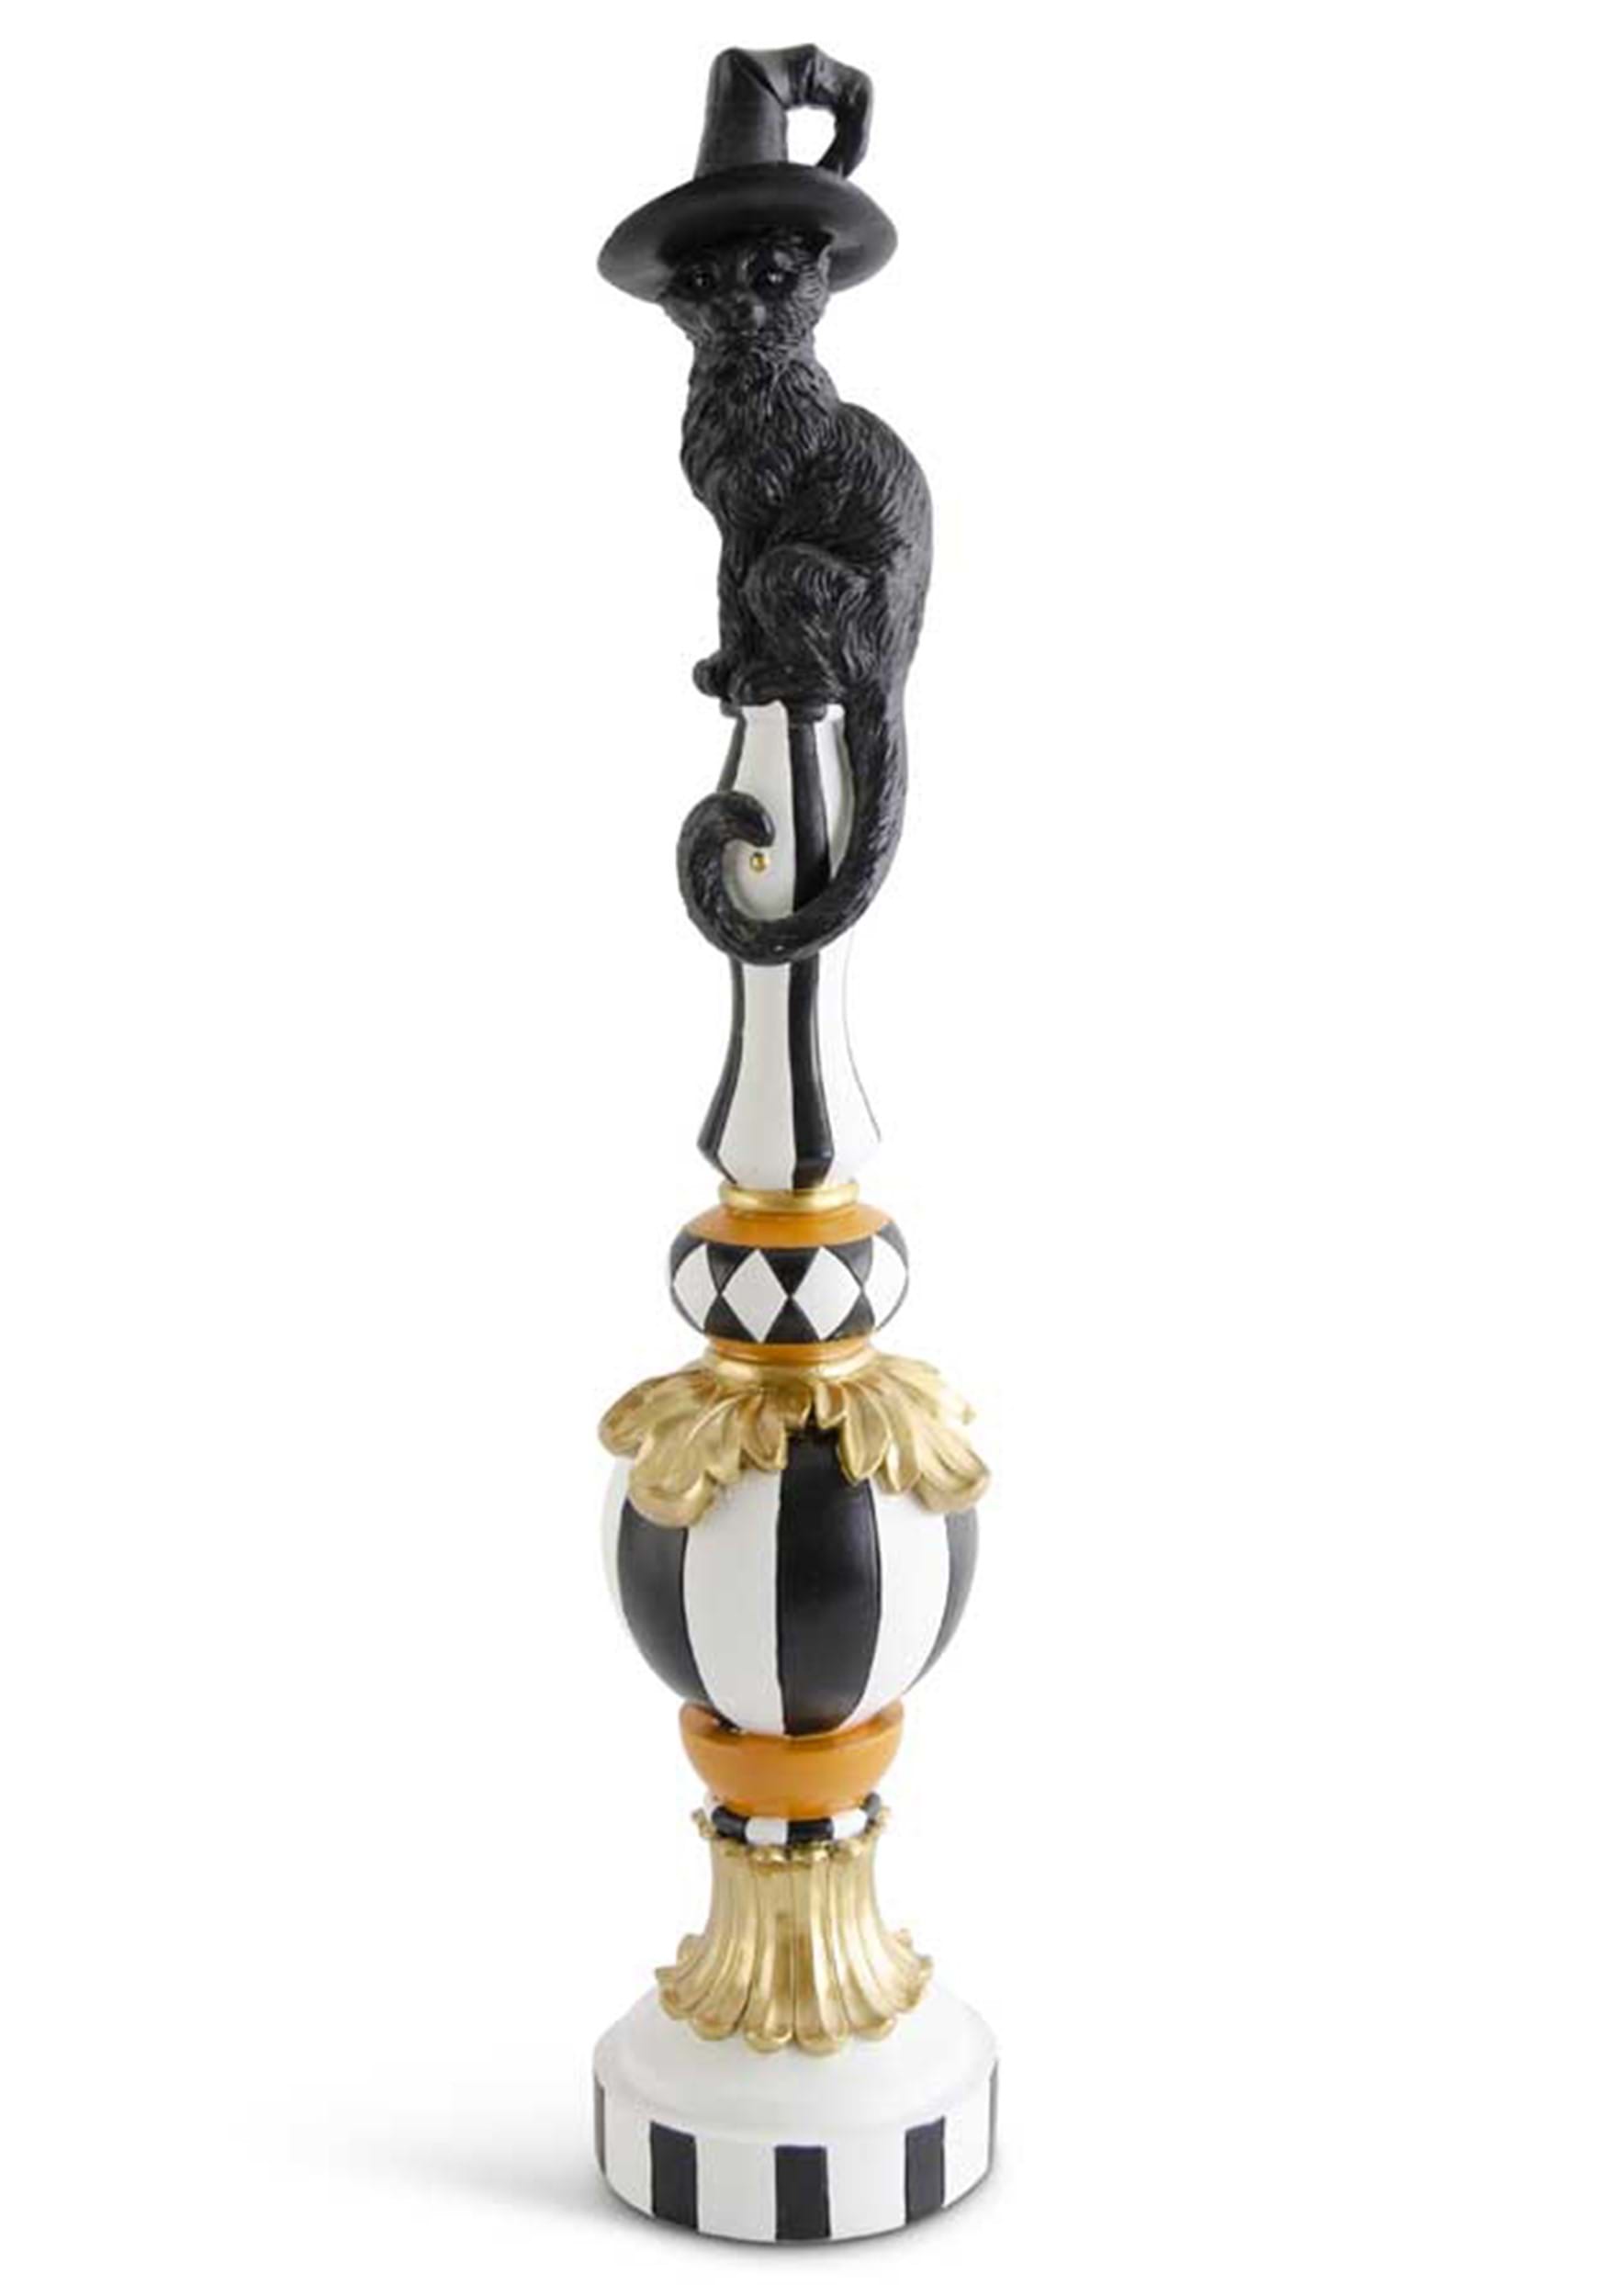 24-Inch Black, White & Orange Finial with Cat Prop